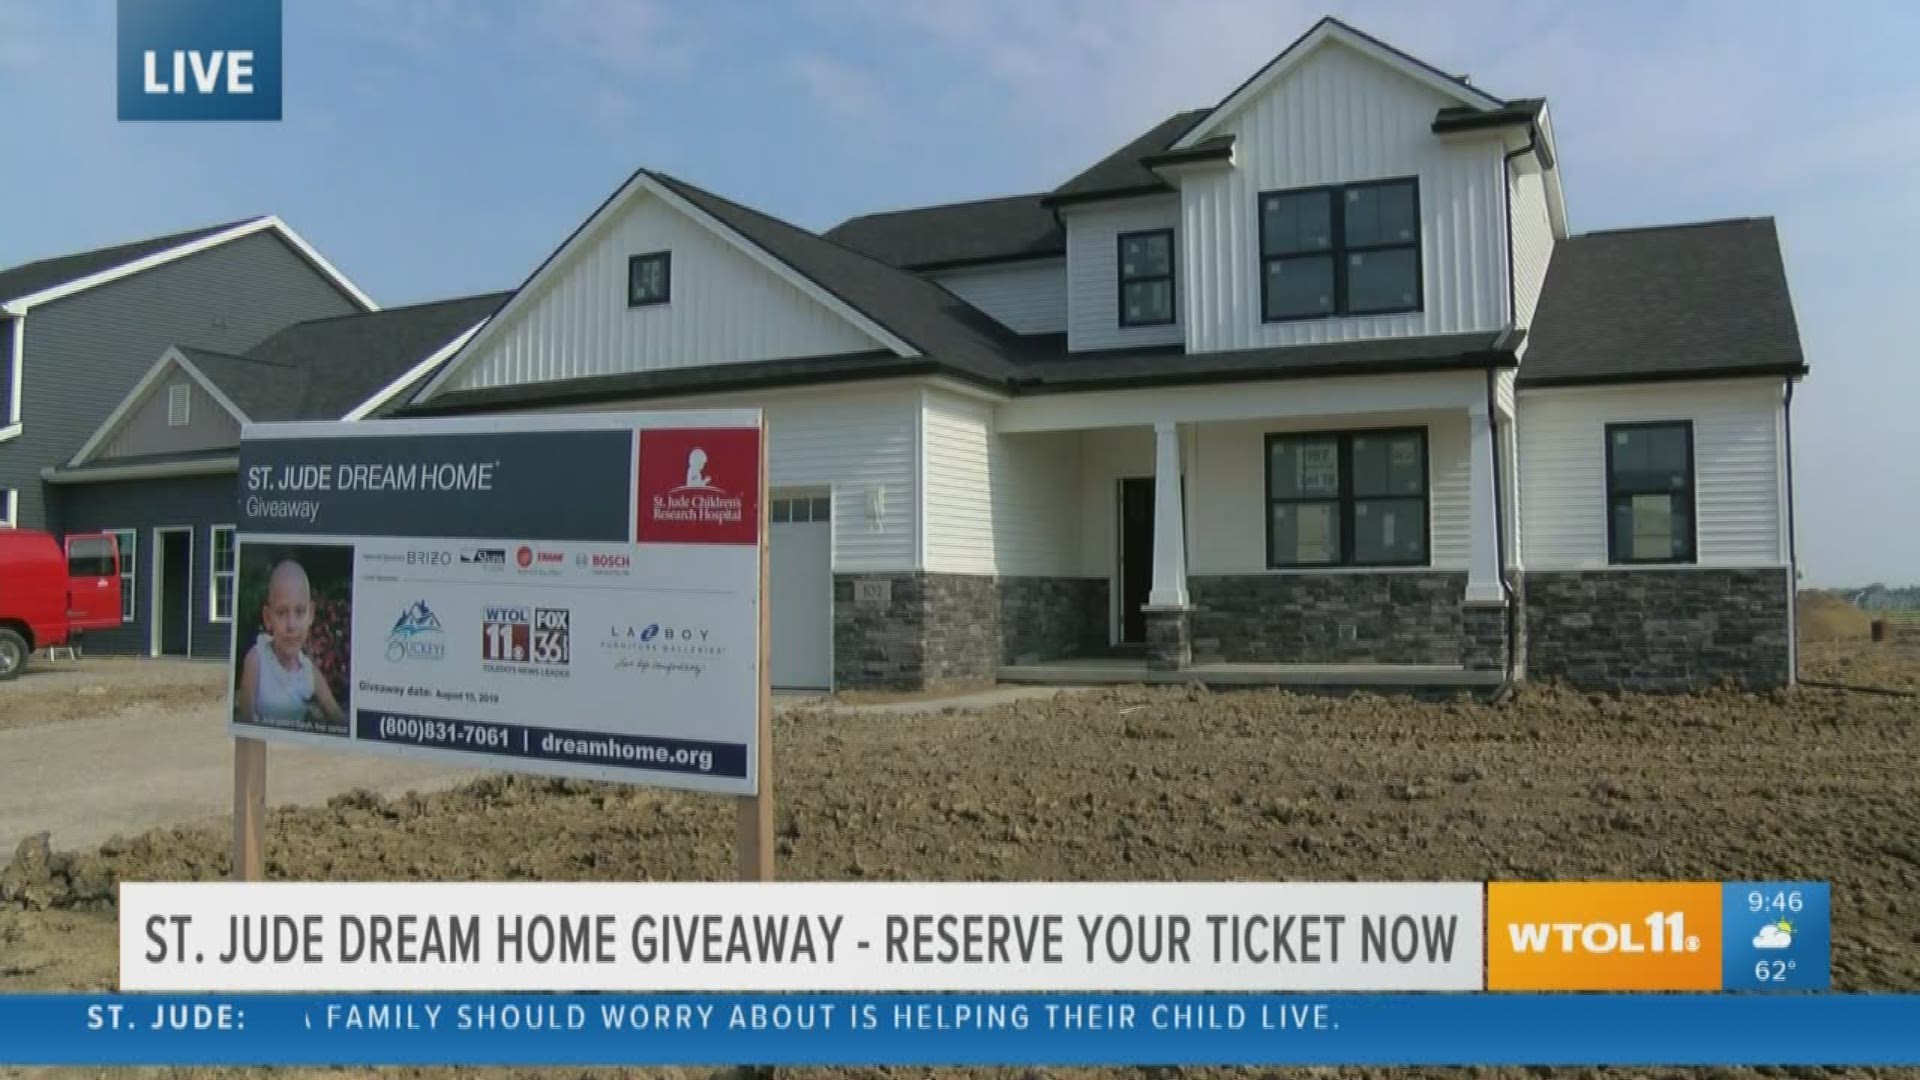 Win more than just a dream home with the St. Jude Giveaway